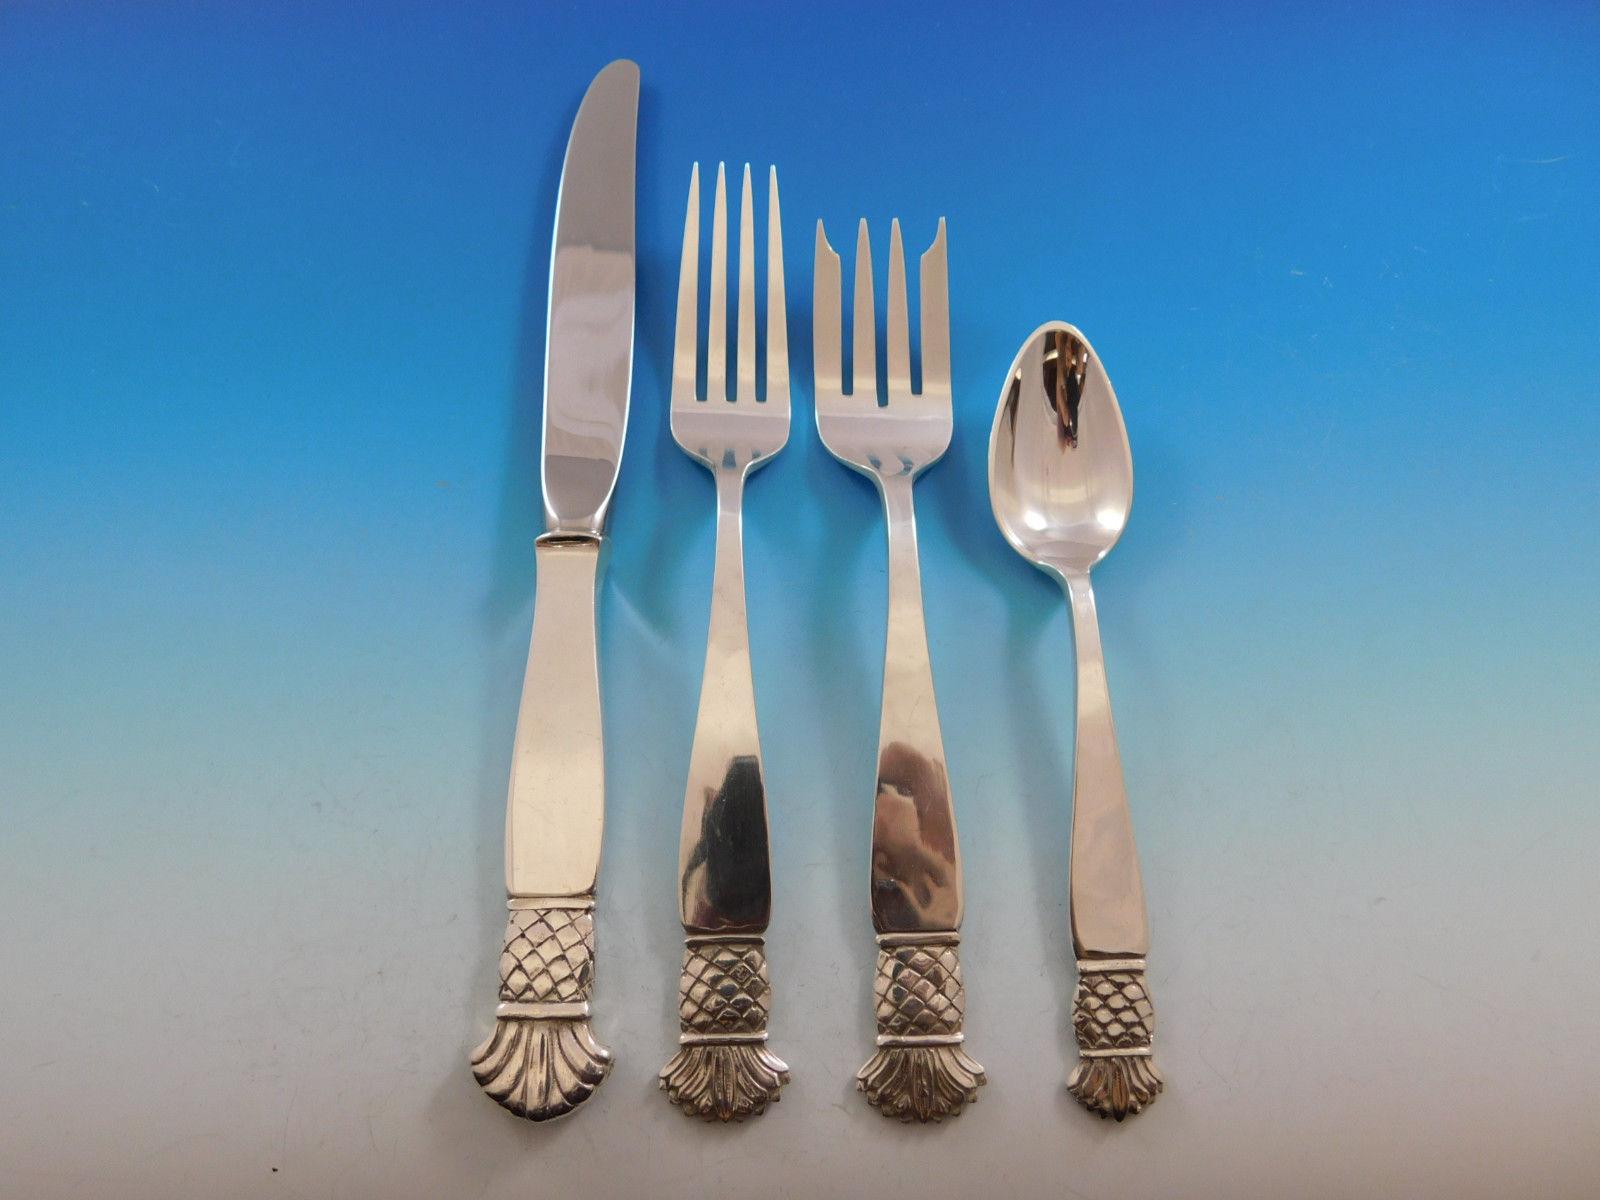 Rare 70 piece sterling silver set of Grenada made by Old Newbury Crafters. It is beautifully handwrought and heavy with innovative solid handle knives. The set includes:

12 knives with solid handles, 9